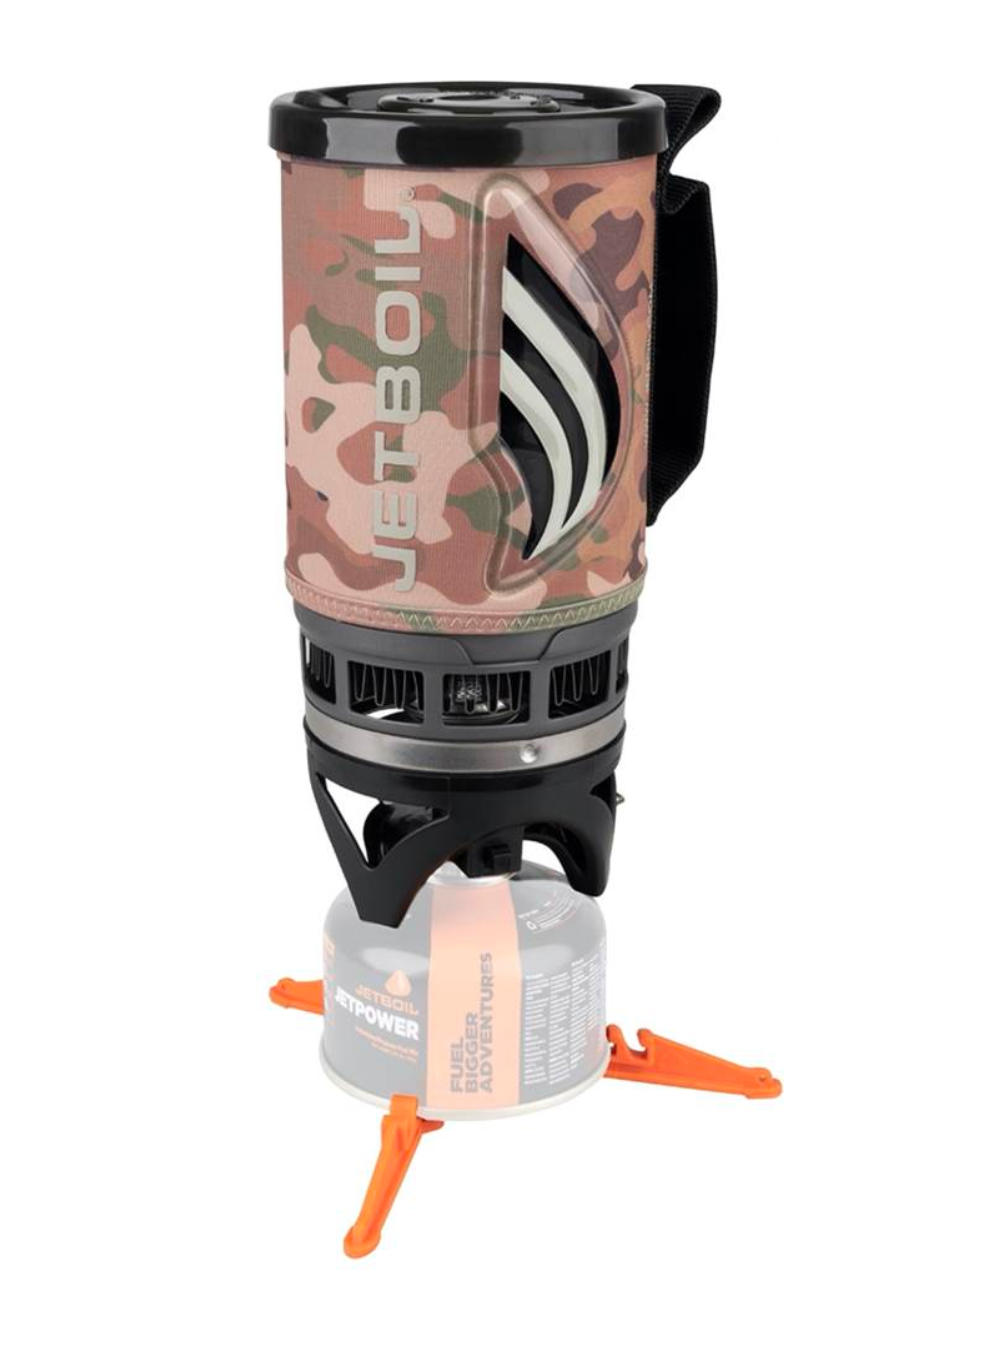 SALE - Jetboil Flash Personal Cooking System - Multicam